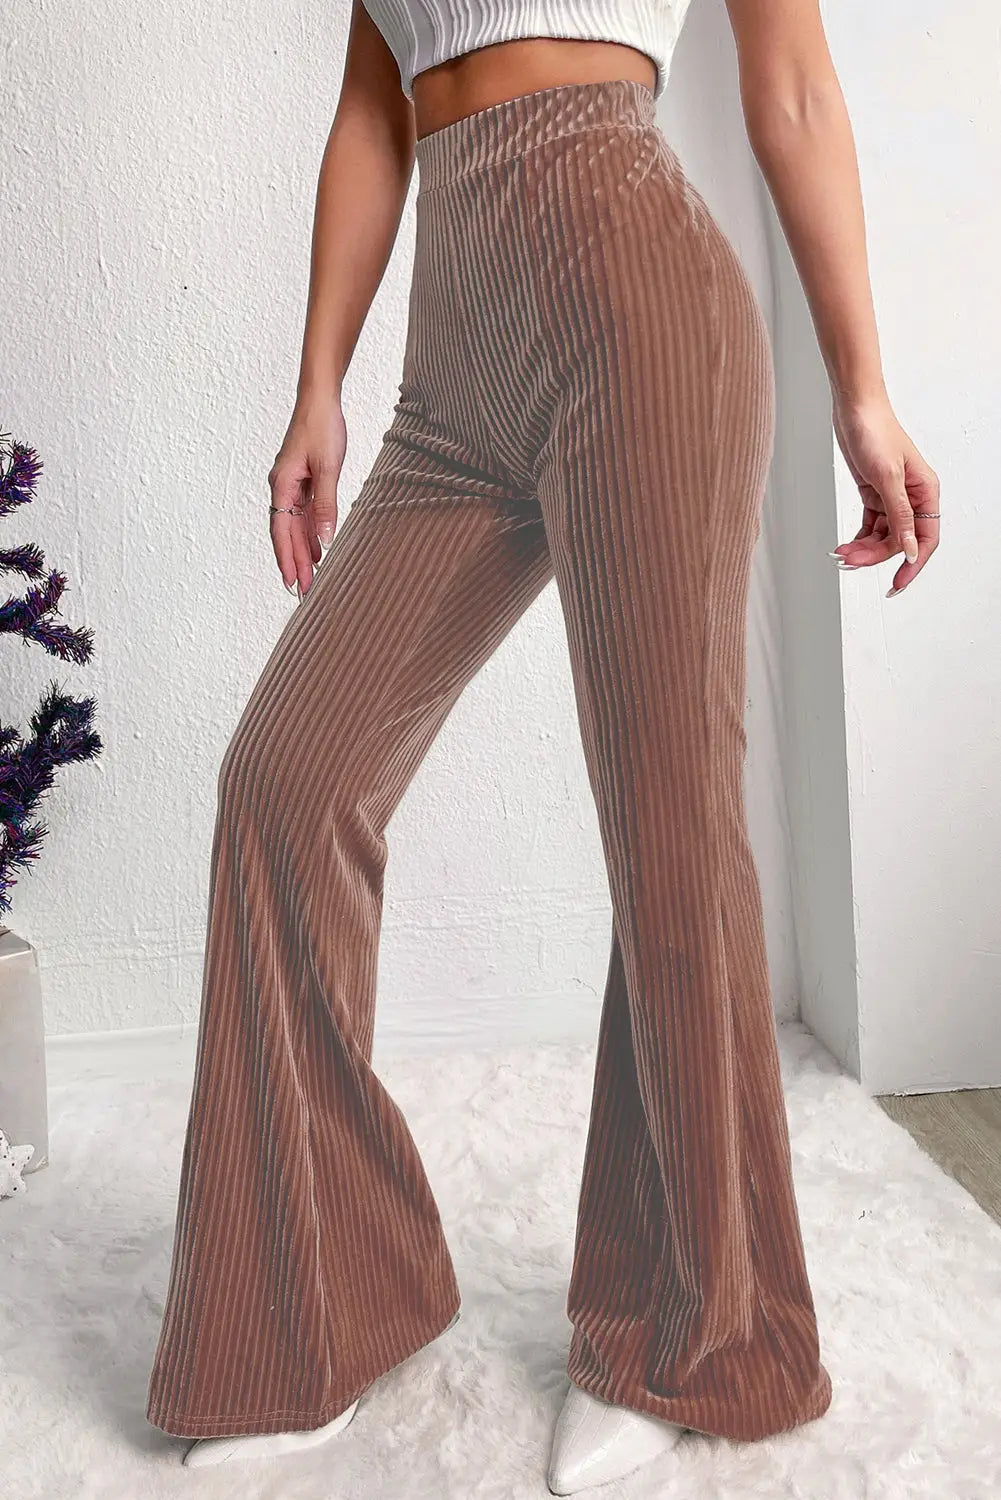 Dusty pink solid color high waist flare corduroy pants - bottoms